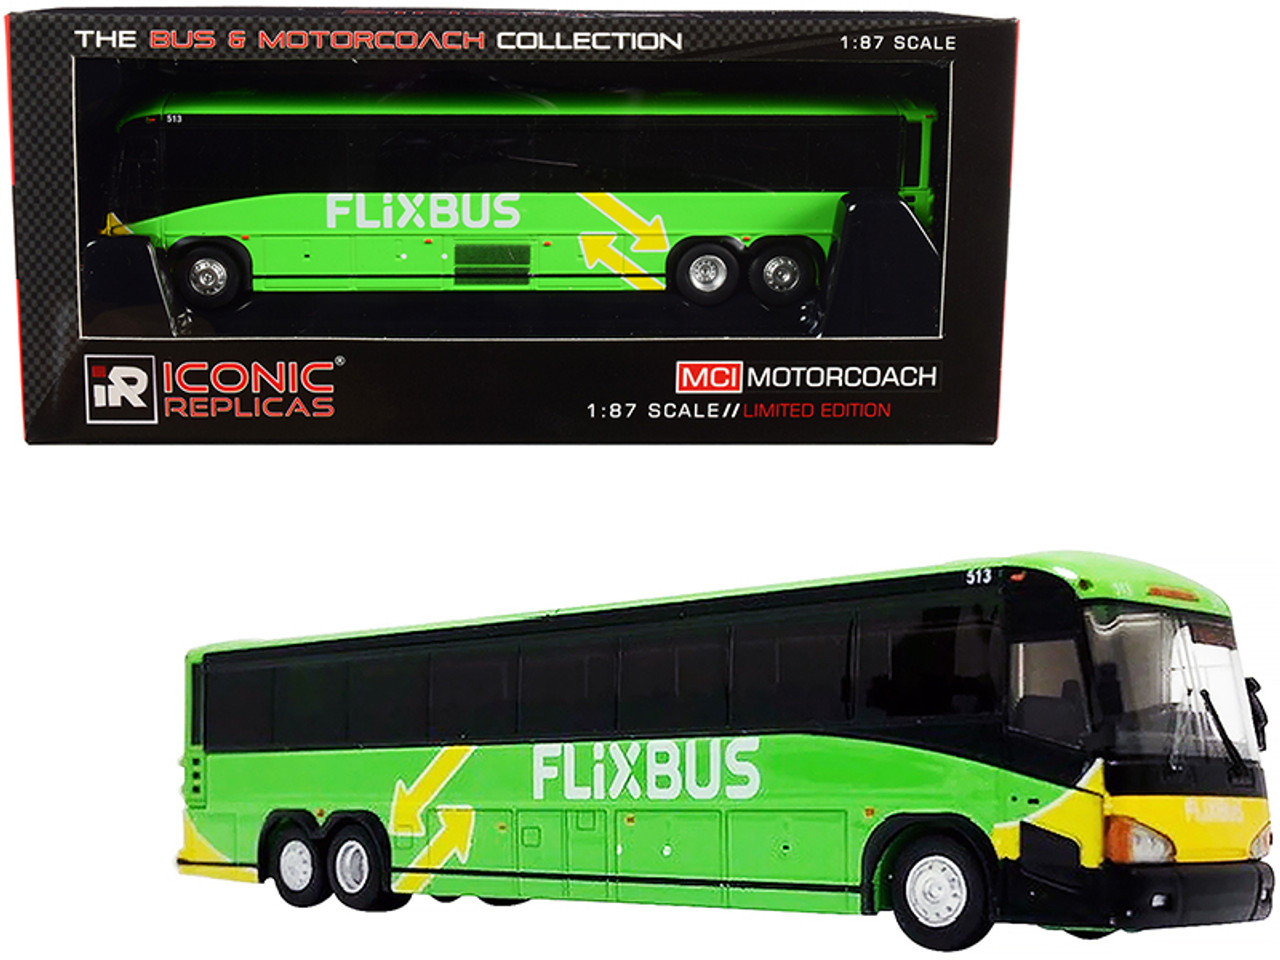 MCI D4505 Motorcoach Bus "Phoenix" (Arizona) "Flixbus" Bright Green and Yellow "The Bus & Motorcoach Collection" 1/87 (HO) Diecast Model by Iconic Replicas